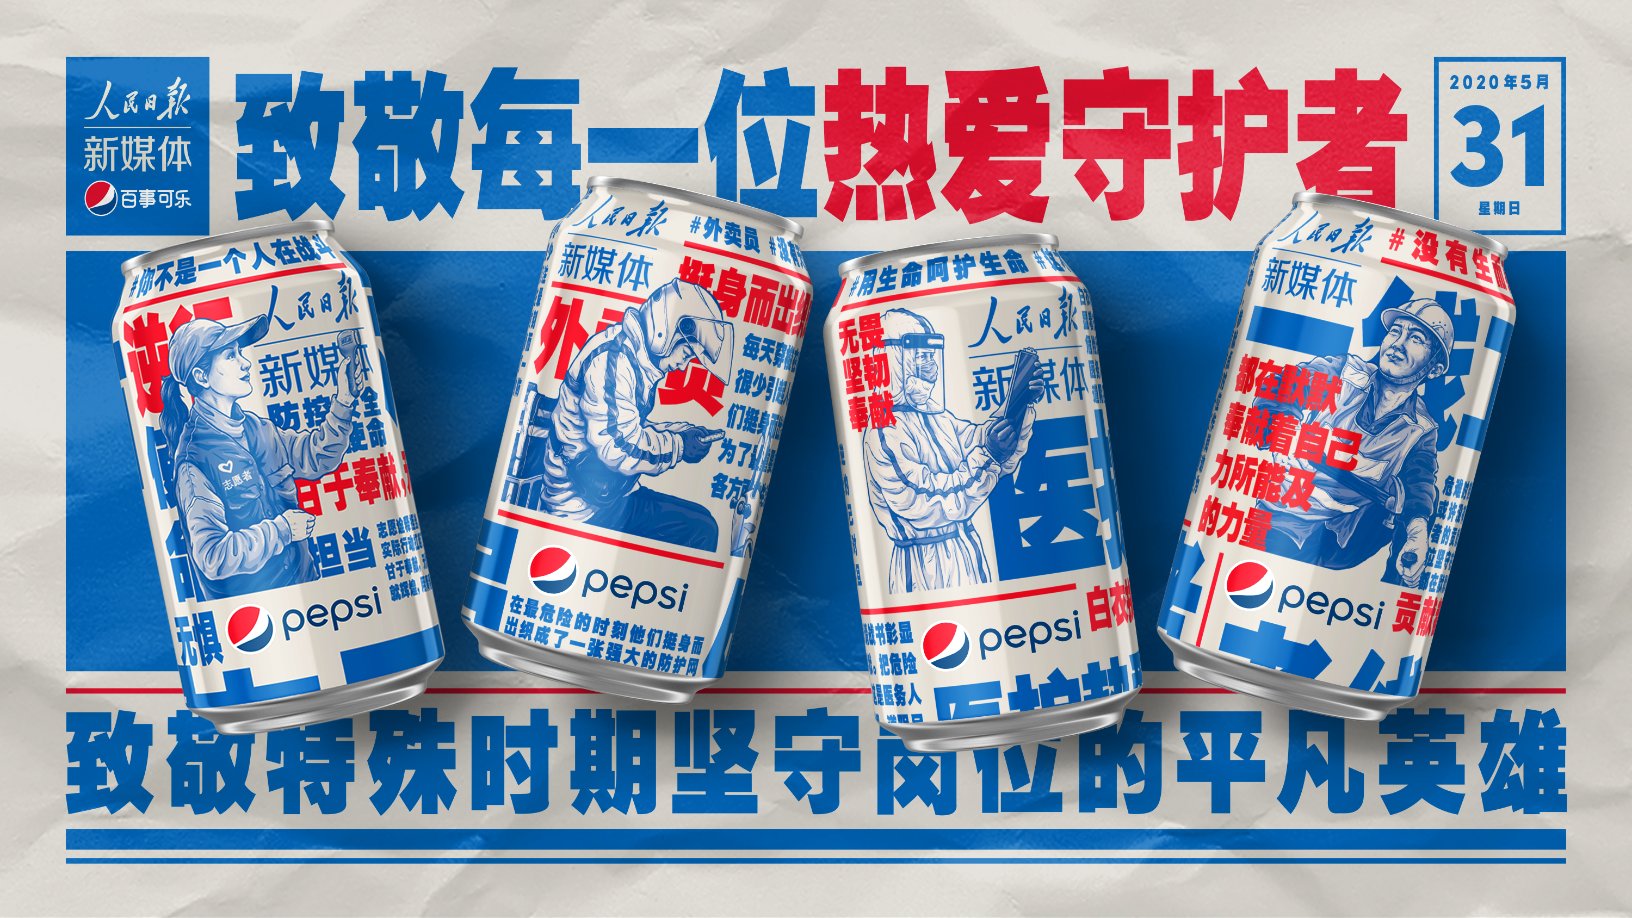 Pepsi x China’s People’s Daily New Media Celebrate A New Generation Of Heroes